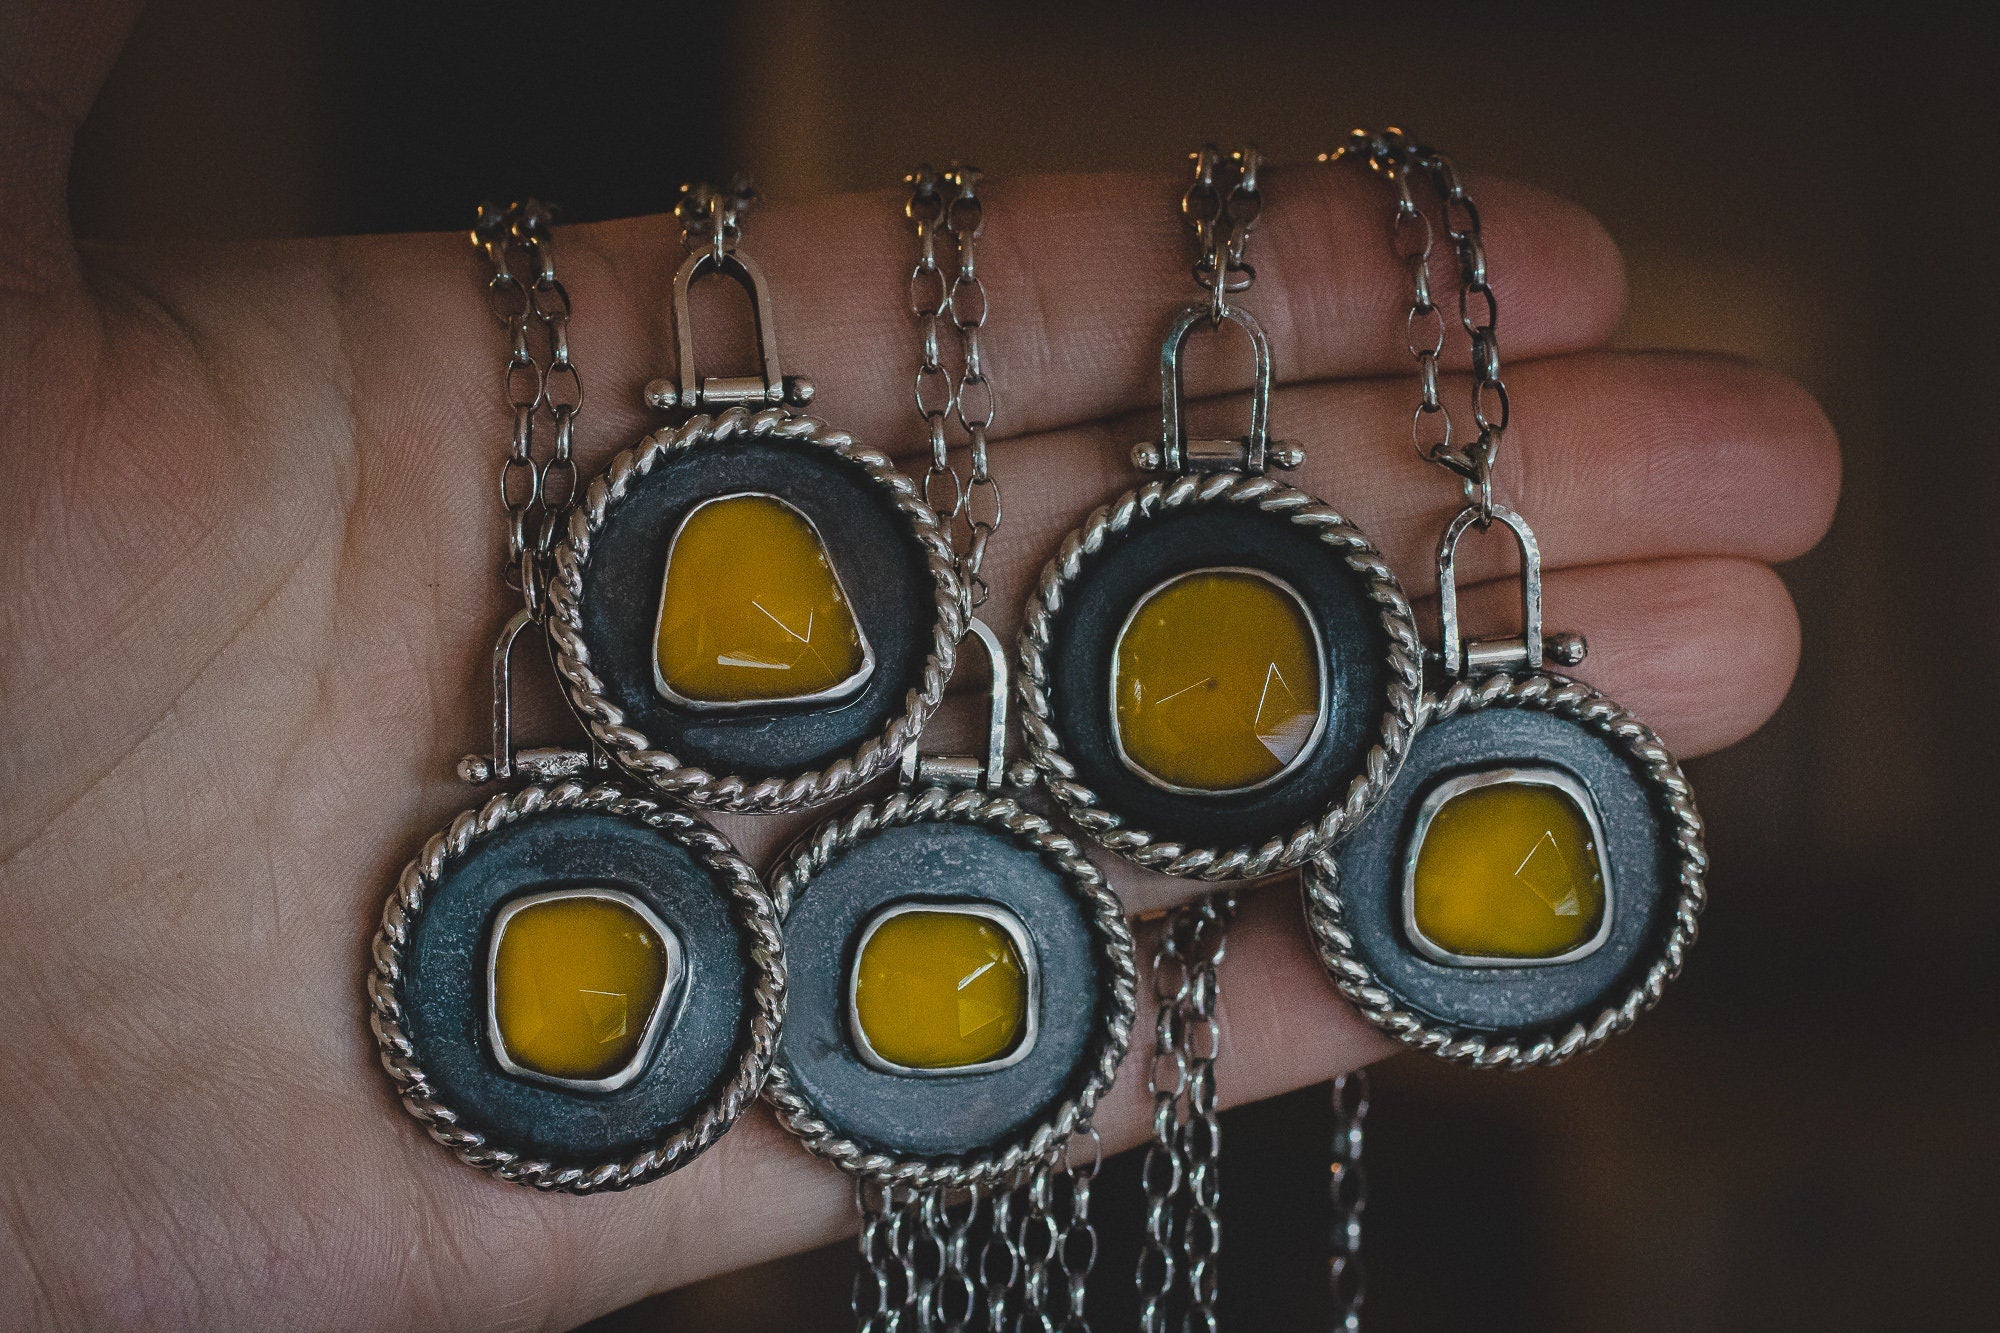 Sunny Yellow Chalcedony Medallion Necklaces - Melanie Golden Jewelry - 7-27-20 Cathedral Collection Release, cathedral, gemstone neckklace, gemstone necklace, necklace, necklaces